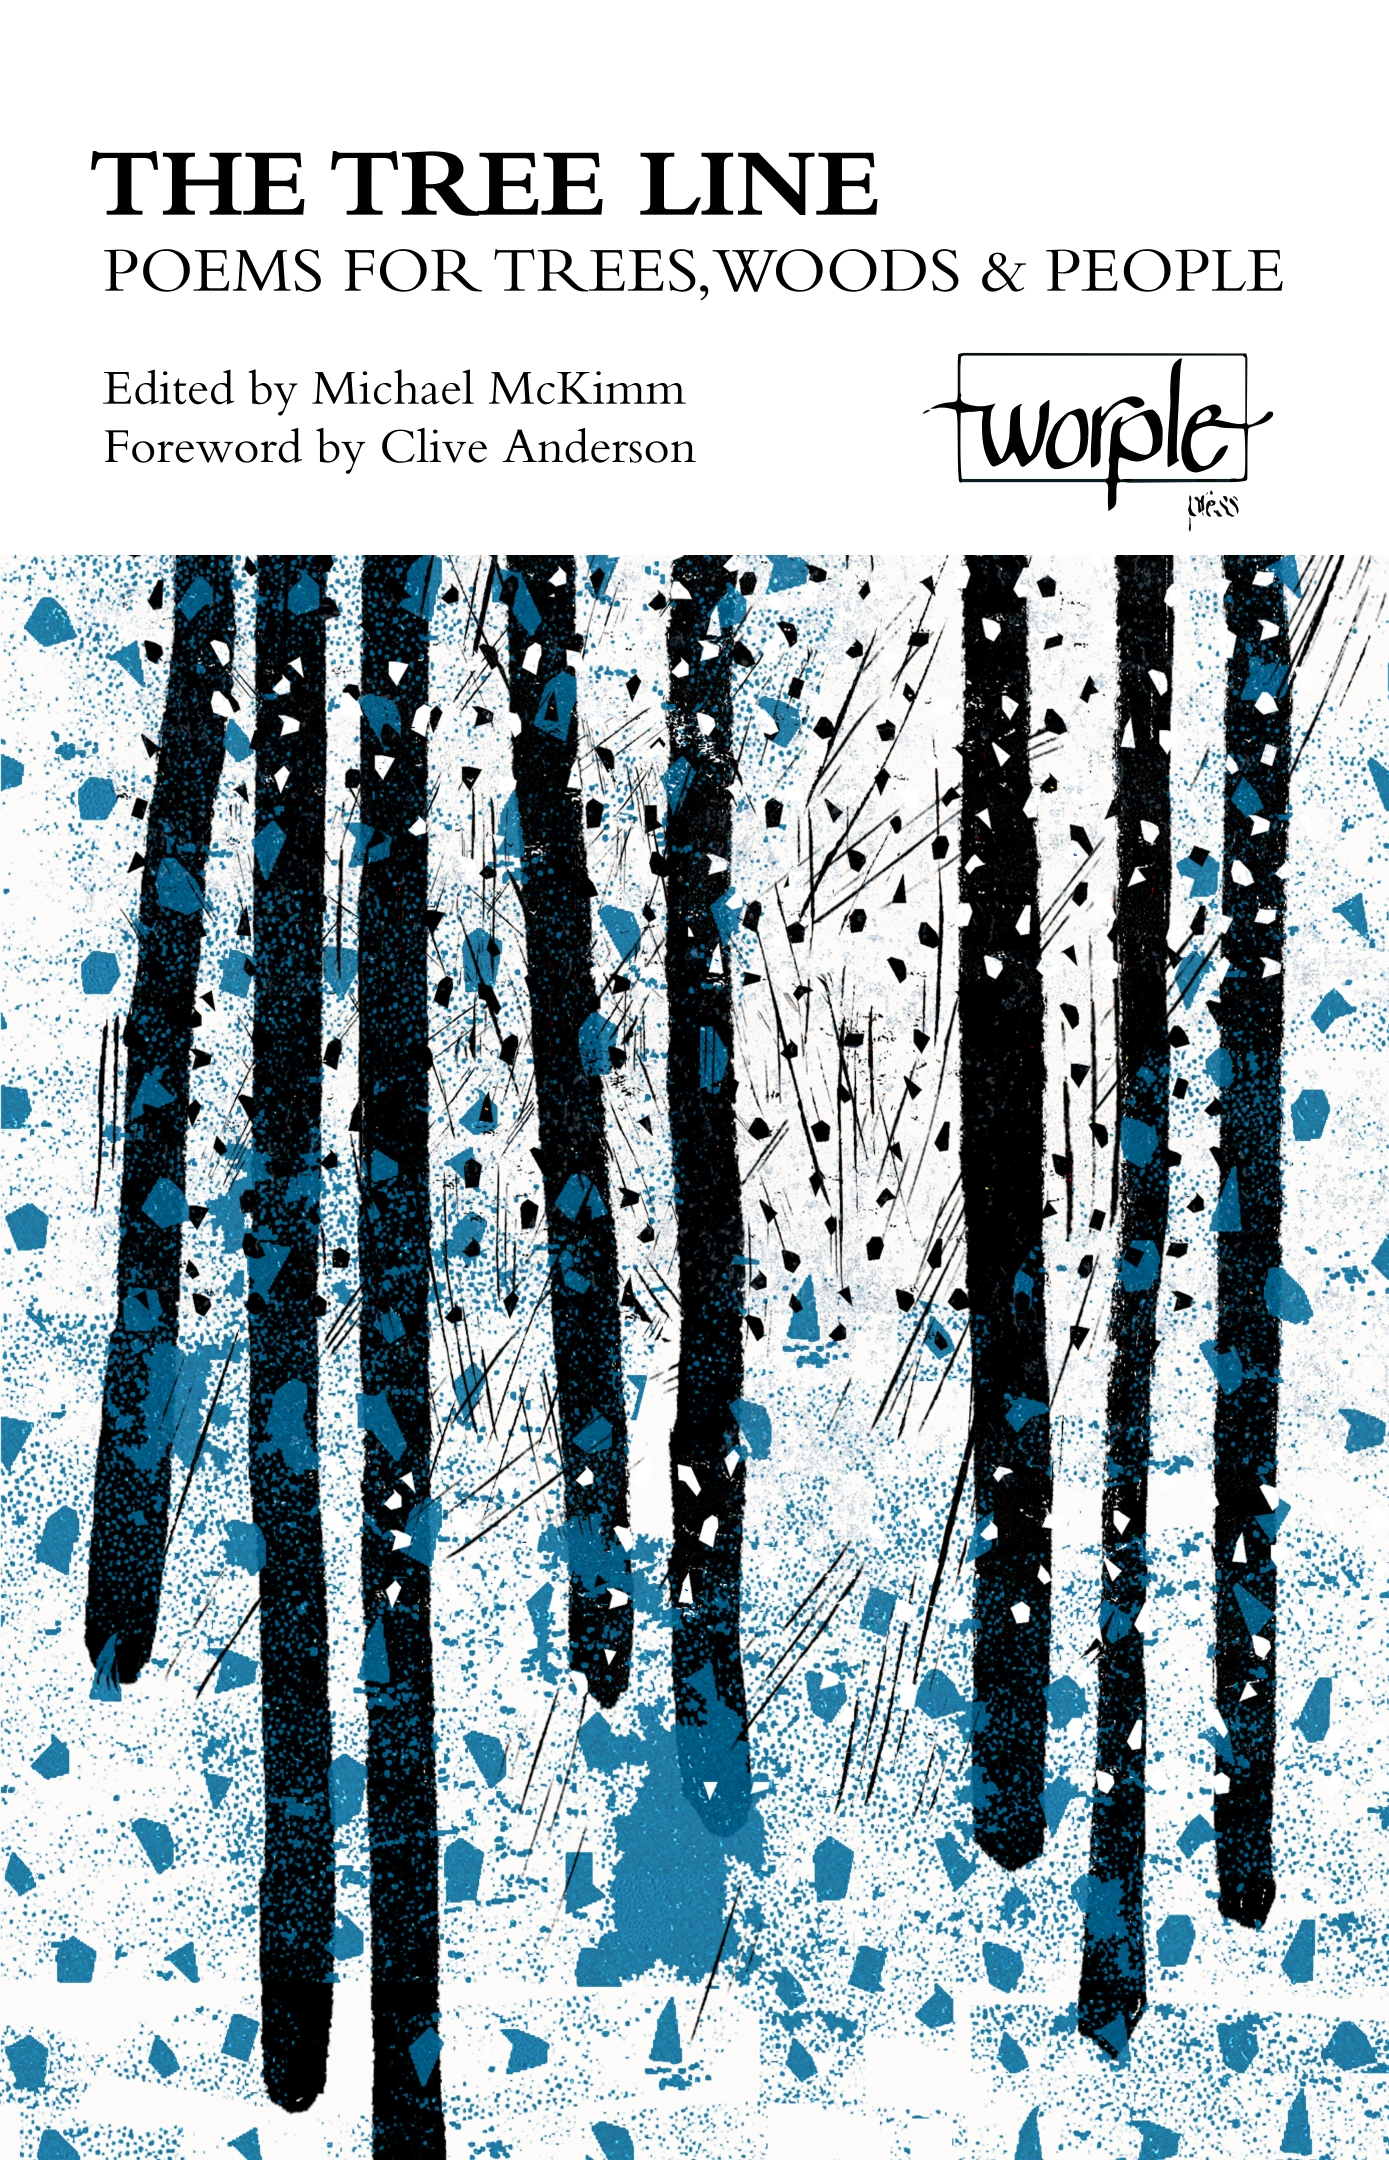 The Tree Line: Poems for Trees, Woods & People